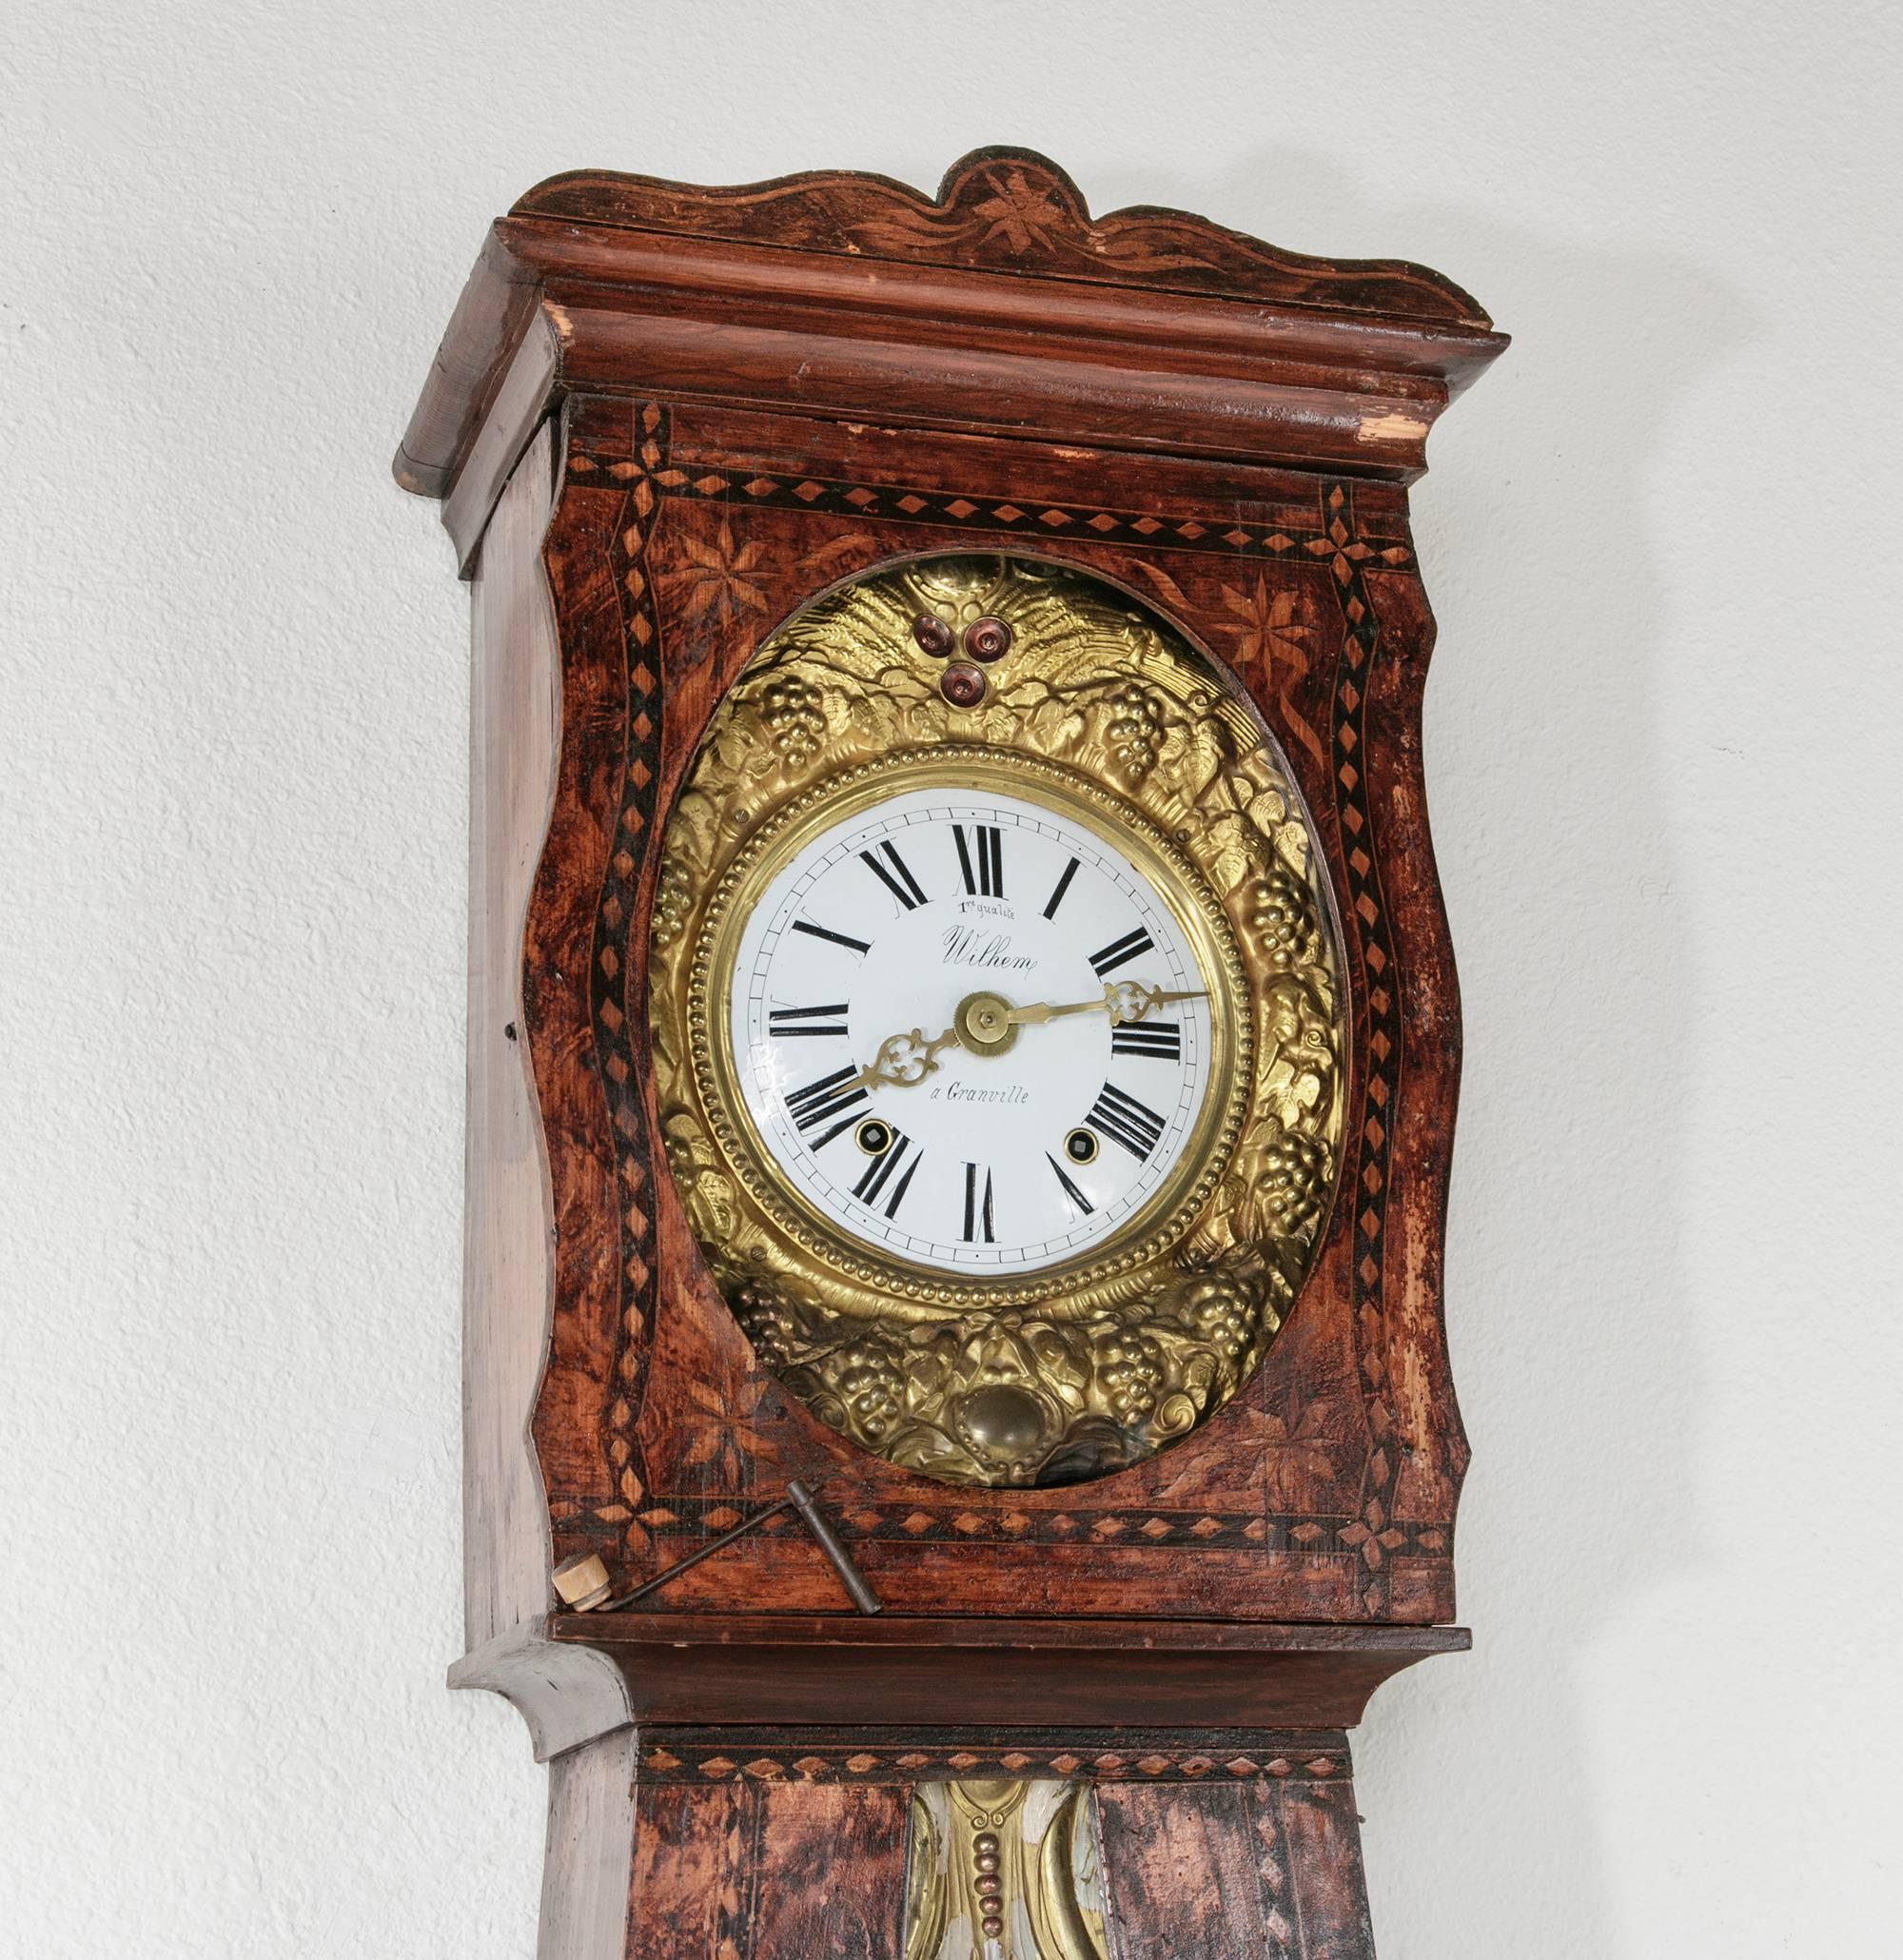 This circa 1850 grandfather clock is housed in a pine case elaborately painted in its original faux bois, as was the custom for these country clocks often found in the farmhouses in mid-19th century France. Its seven day Morbier clock movement